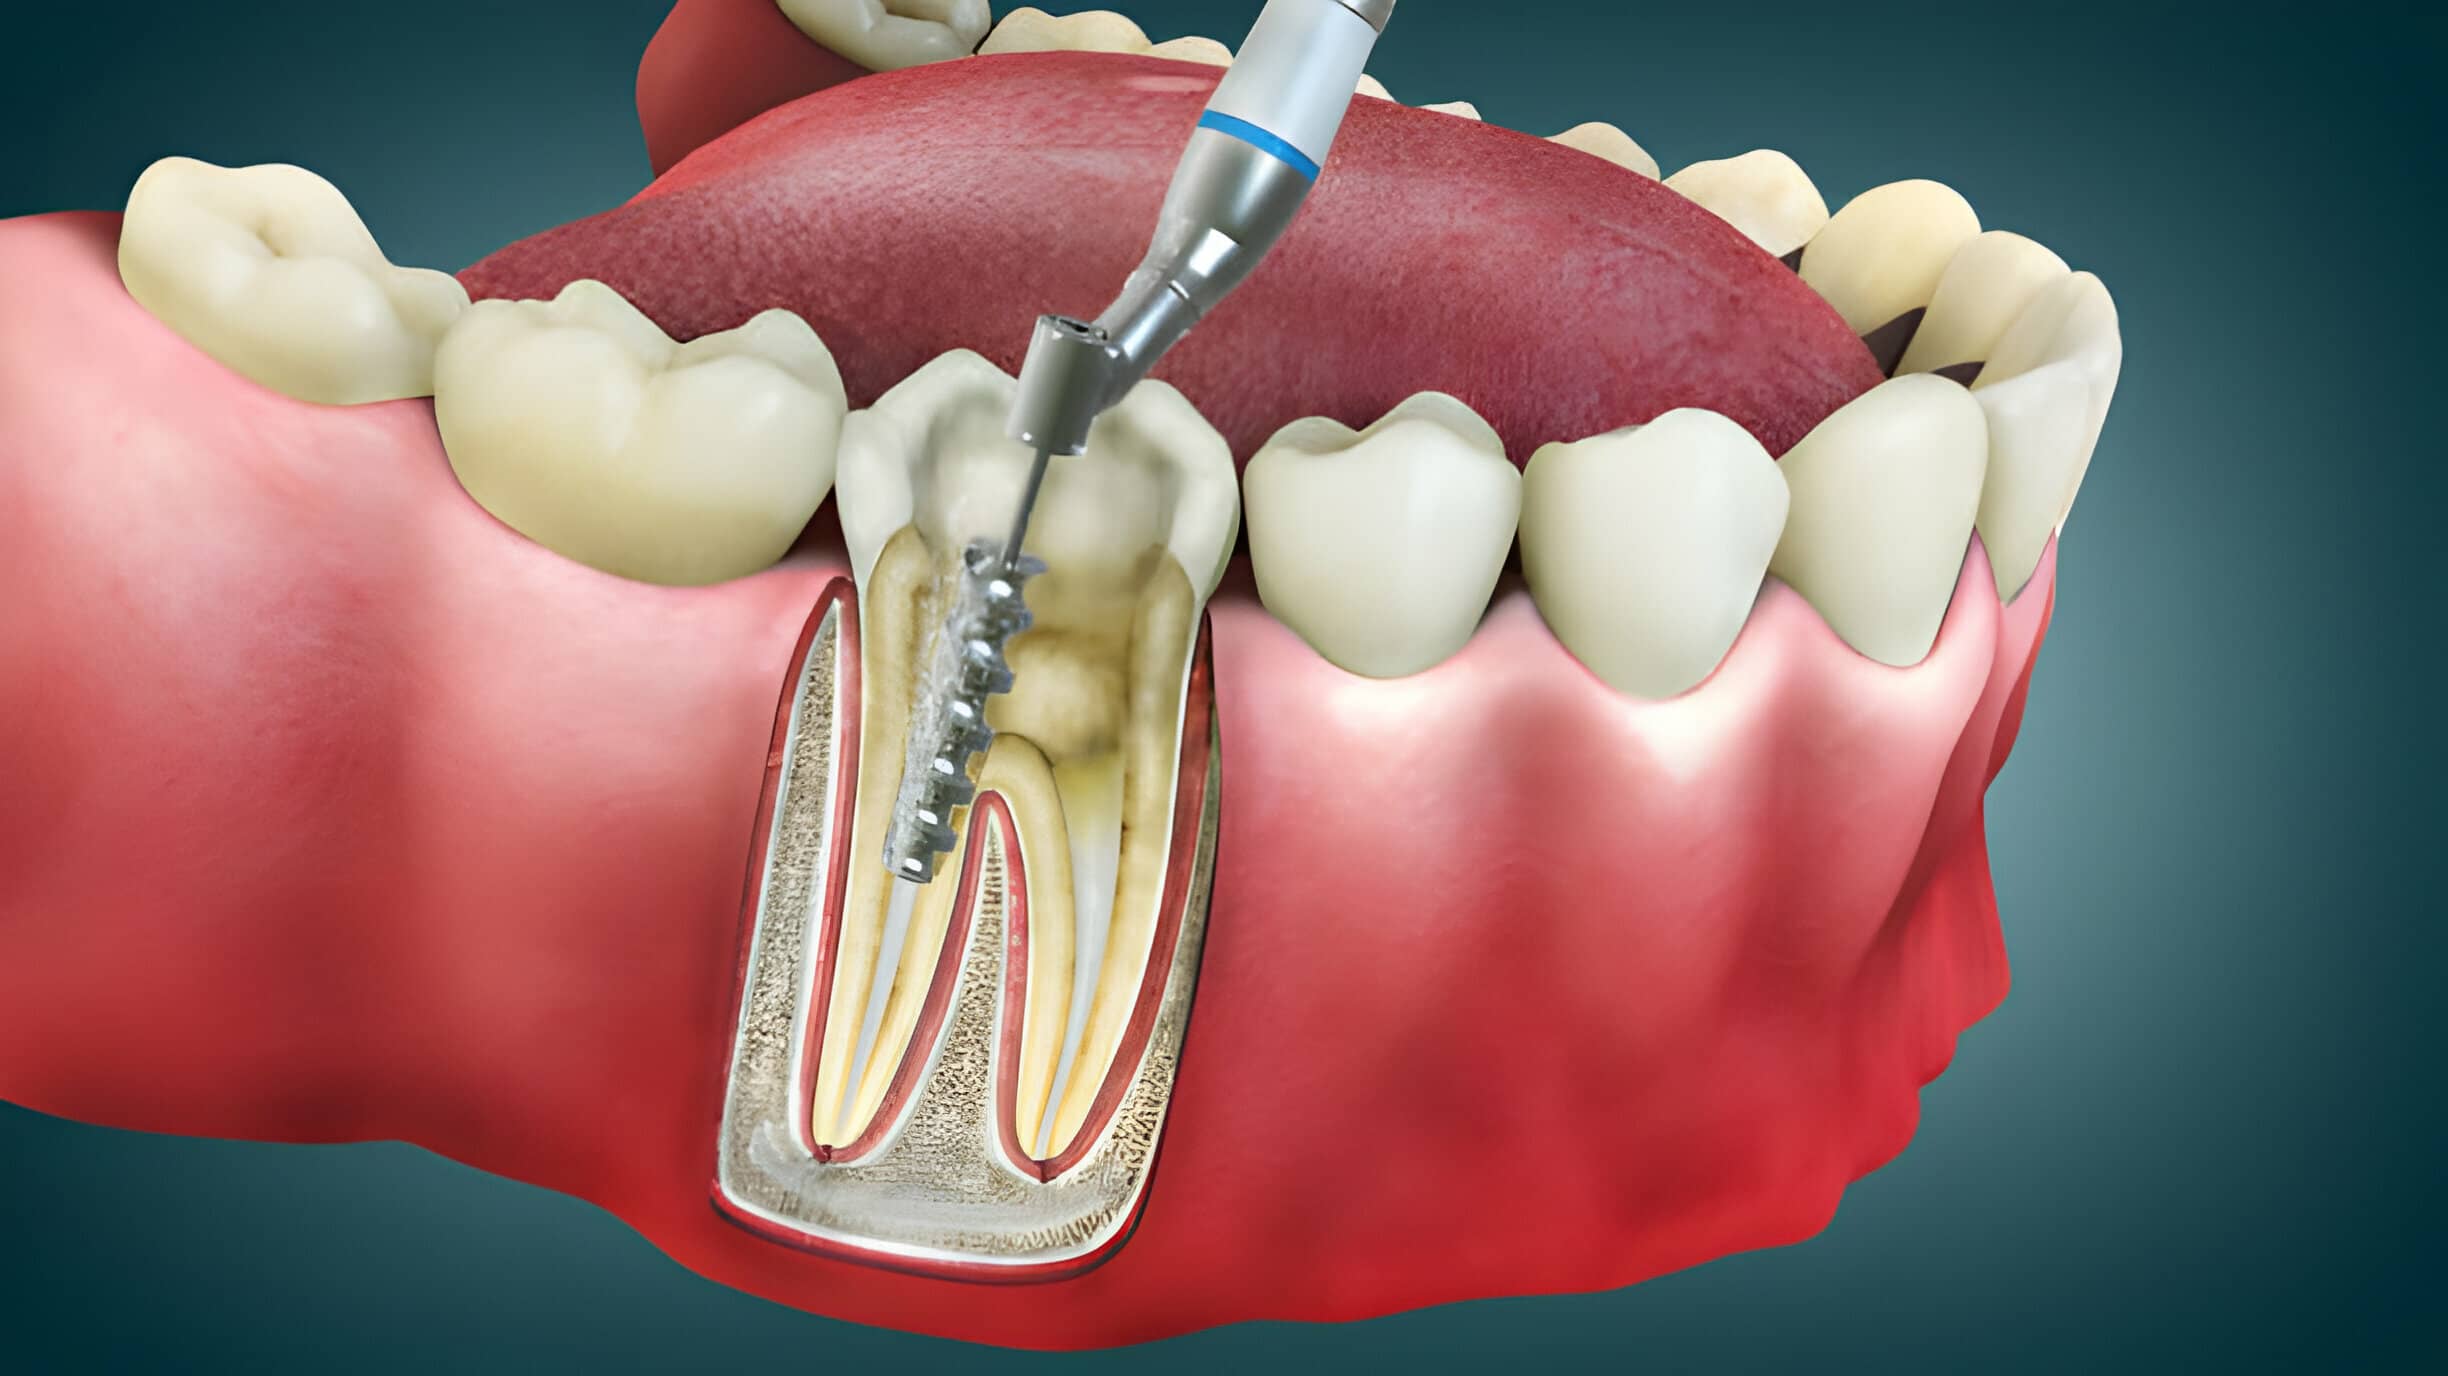 When Do You Need a Root Canal? "Signs and Symptoms"